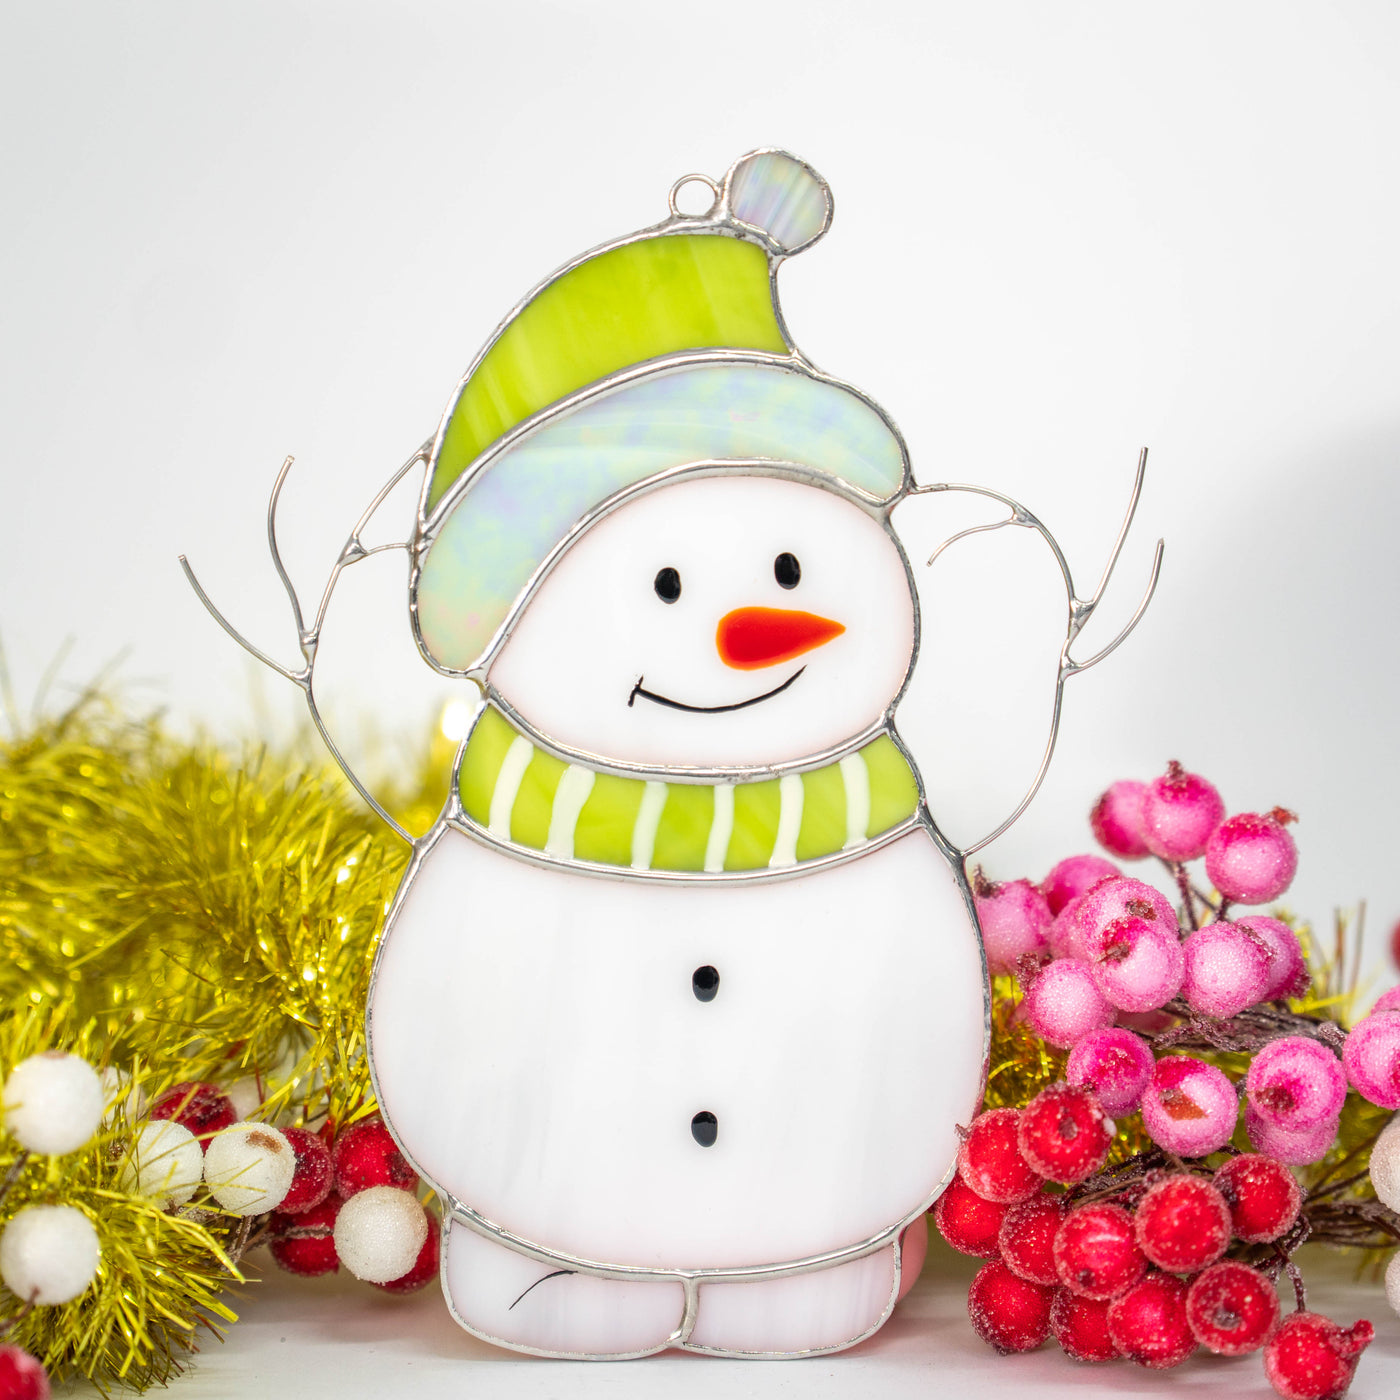 Stained glass snowman in green hat suncatcher for Christmas decor